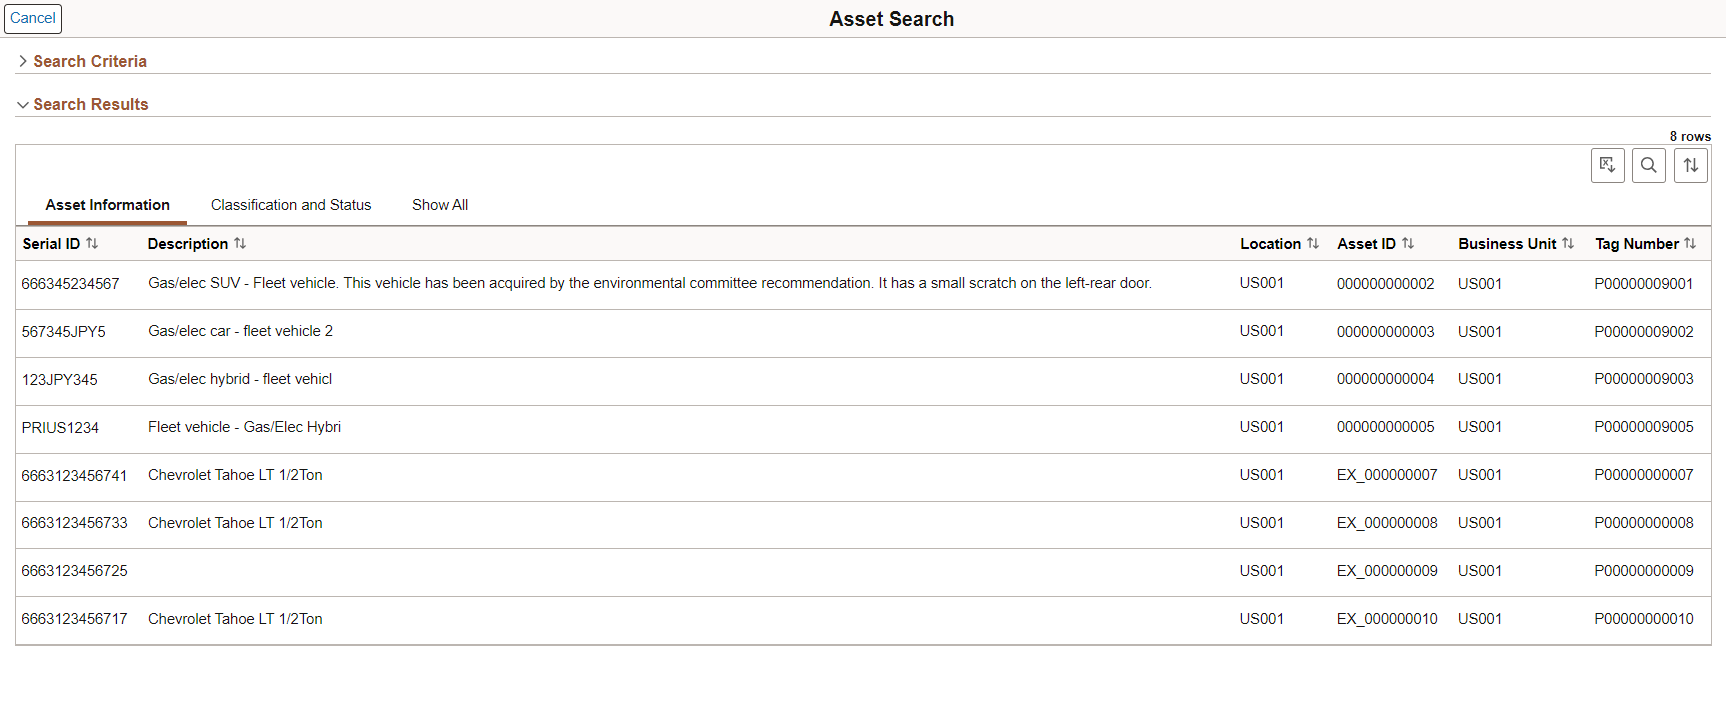 Asset Search Page